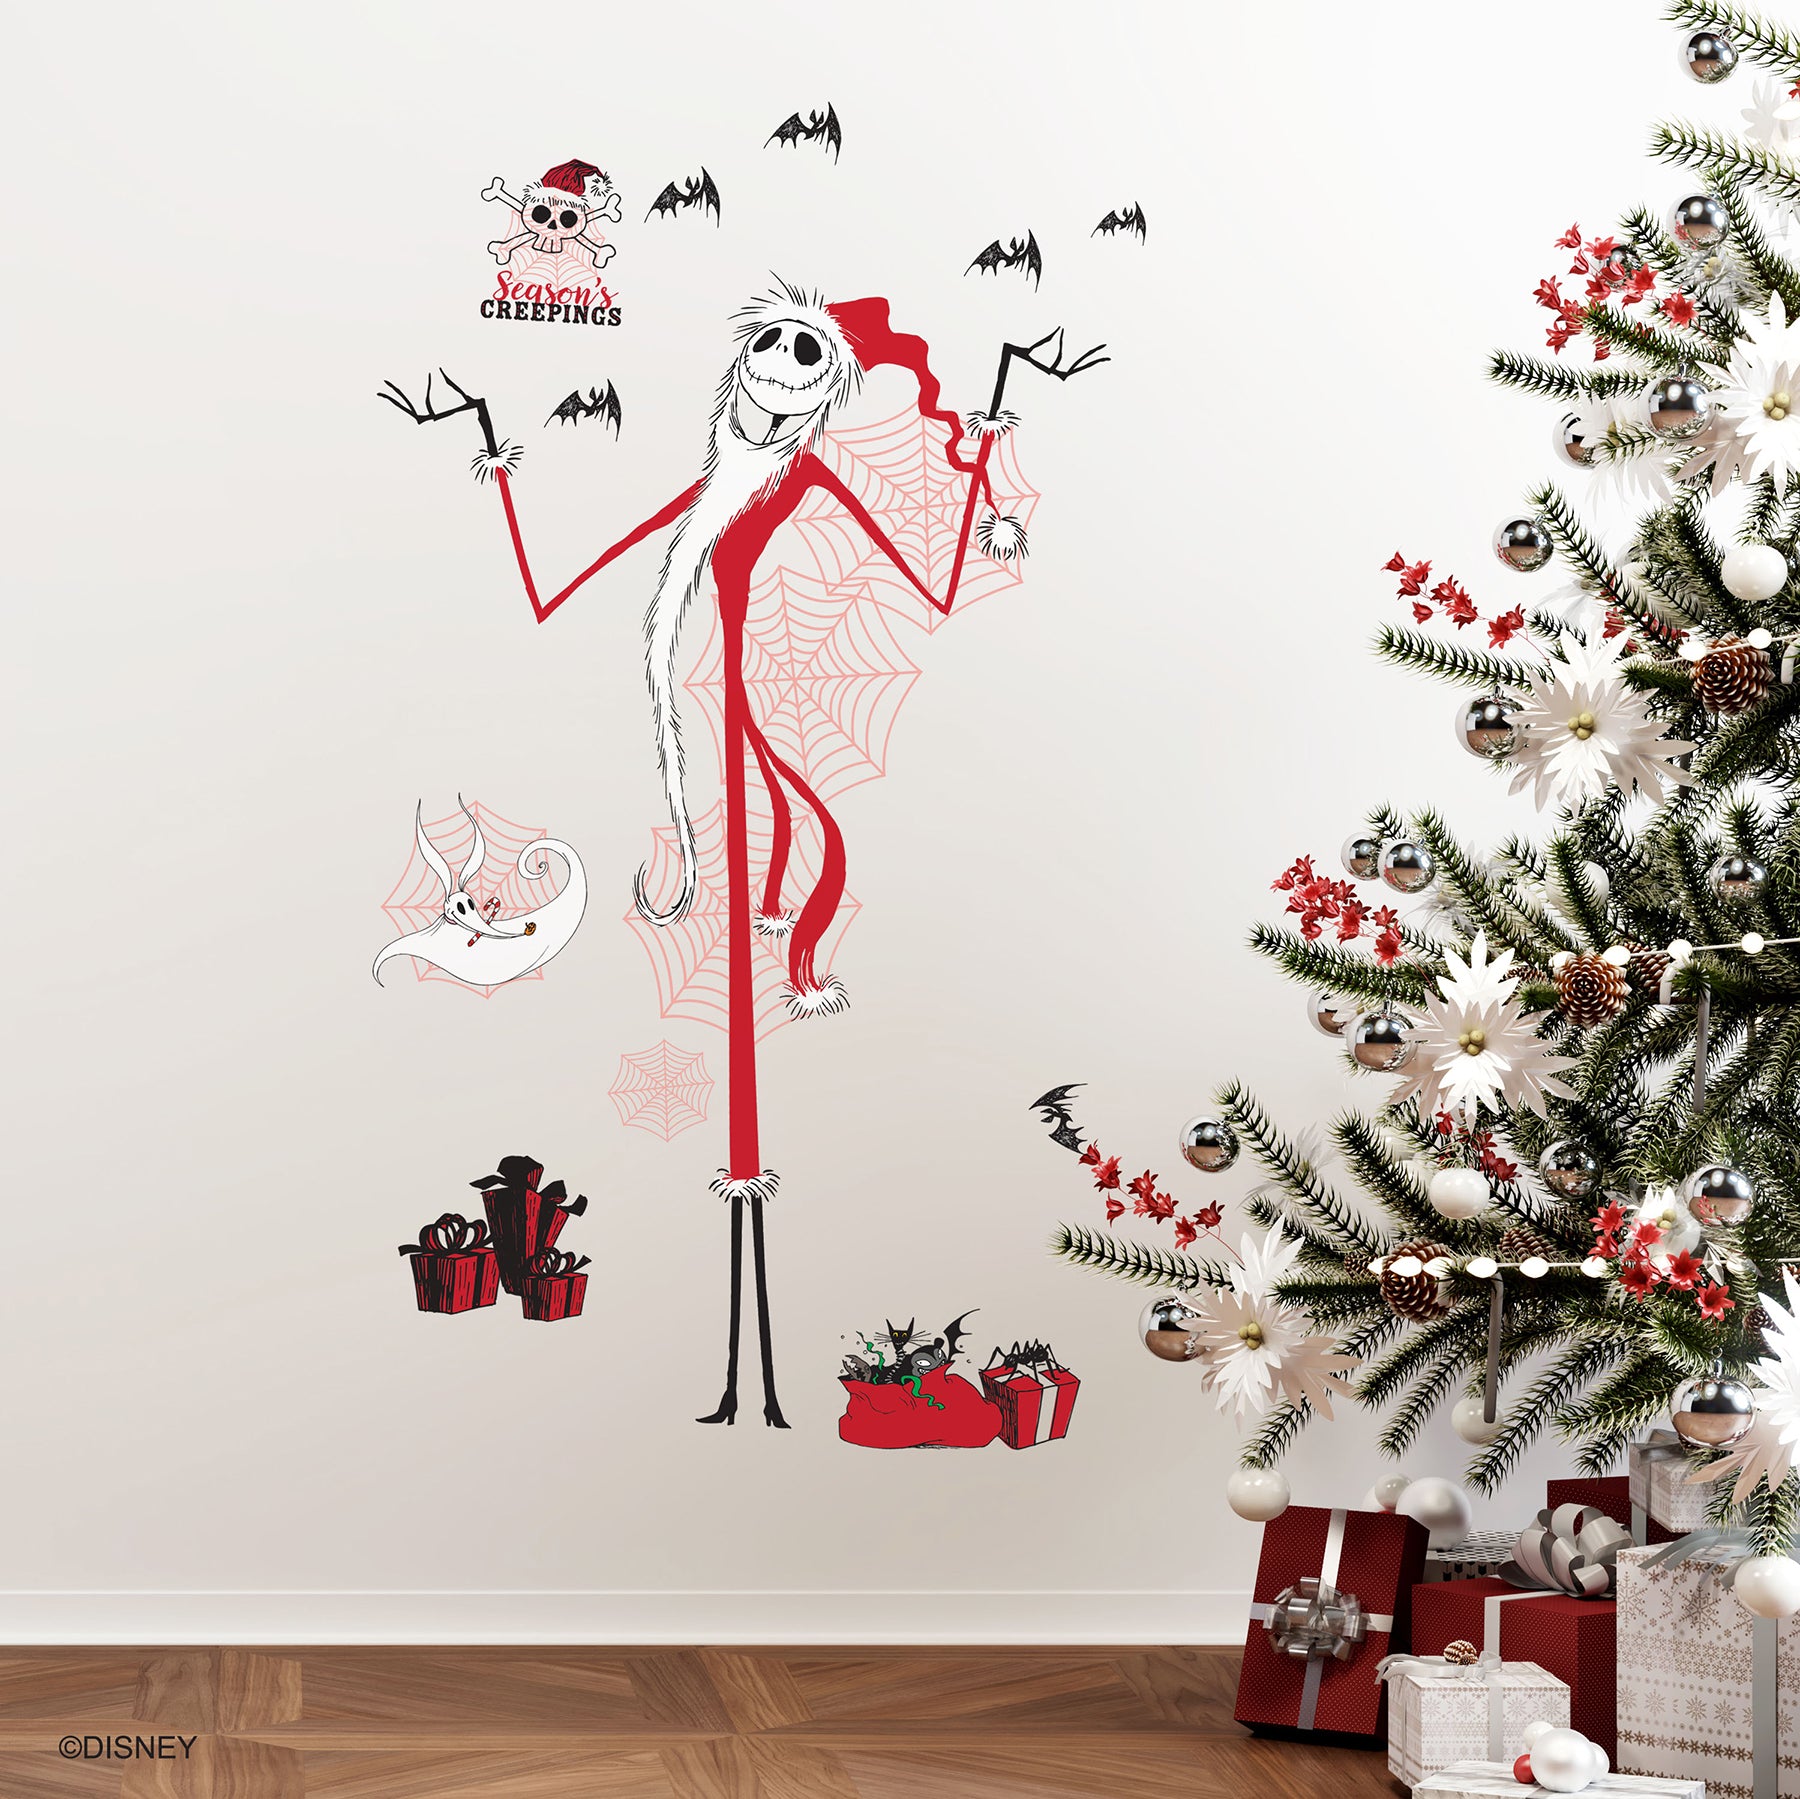 Disney Tim Burton's Nightmare Before Christmas Holiday Giant Wall Decals Wall Decals RoomMates   